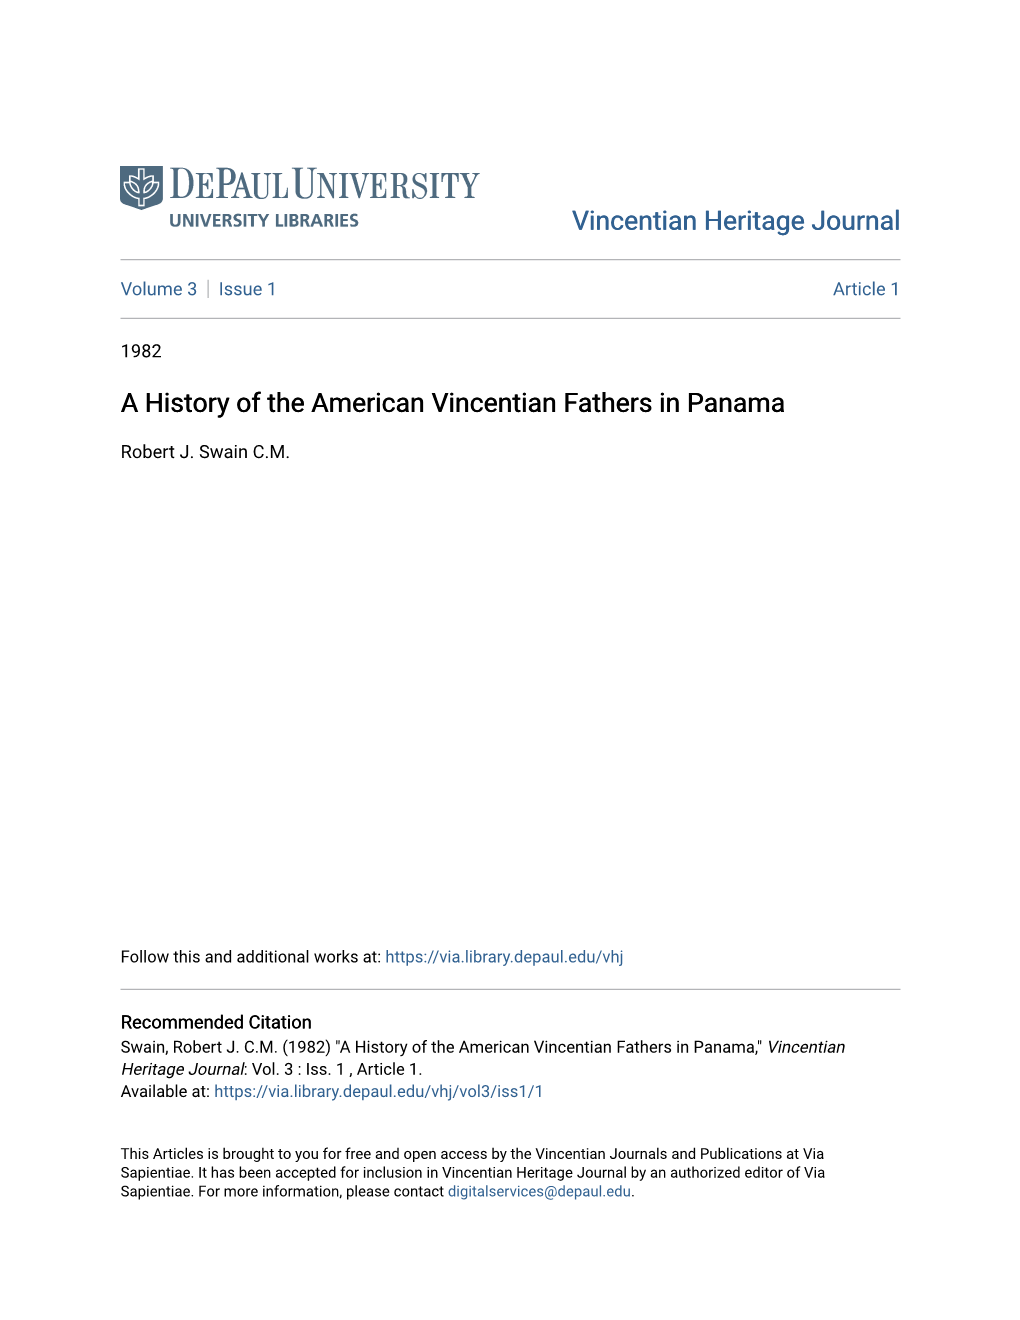 A History of the American Vincentian Fathers in Panama